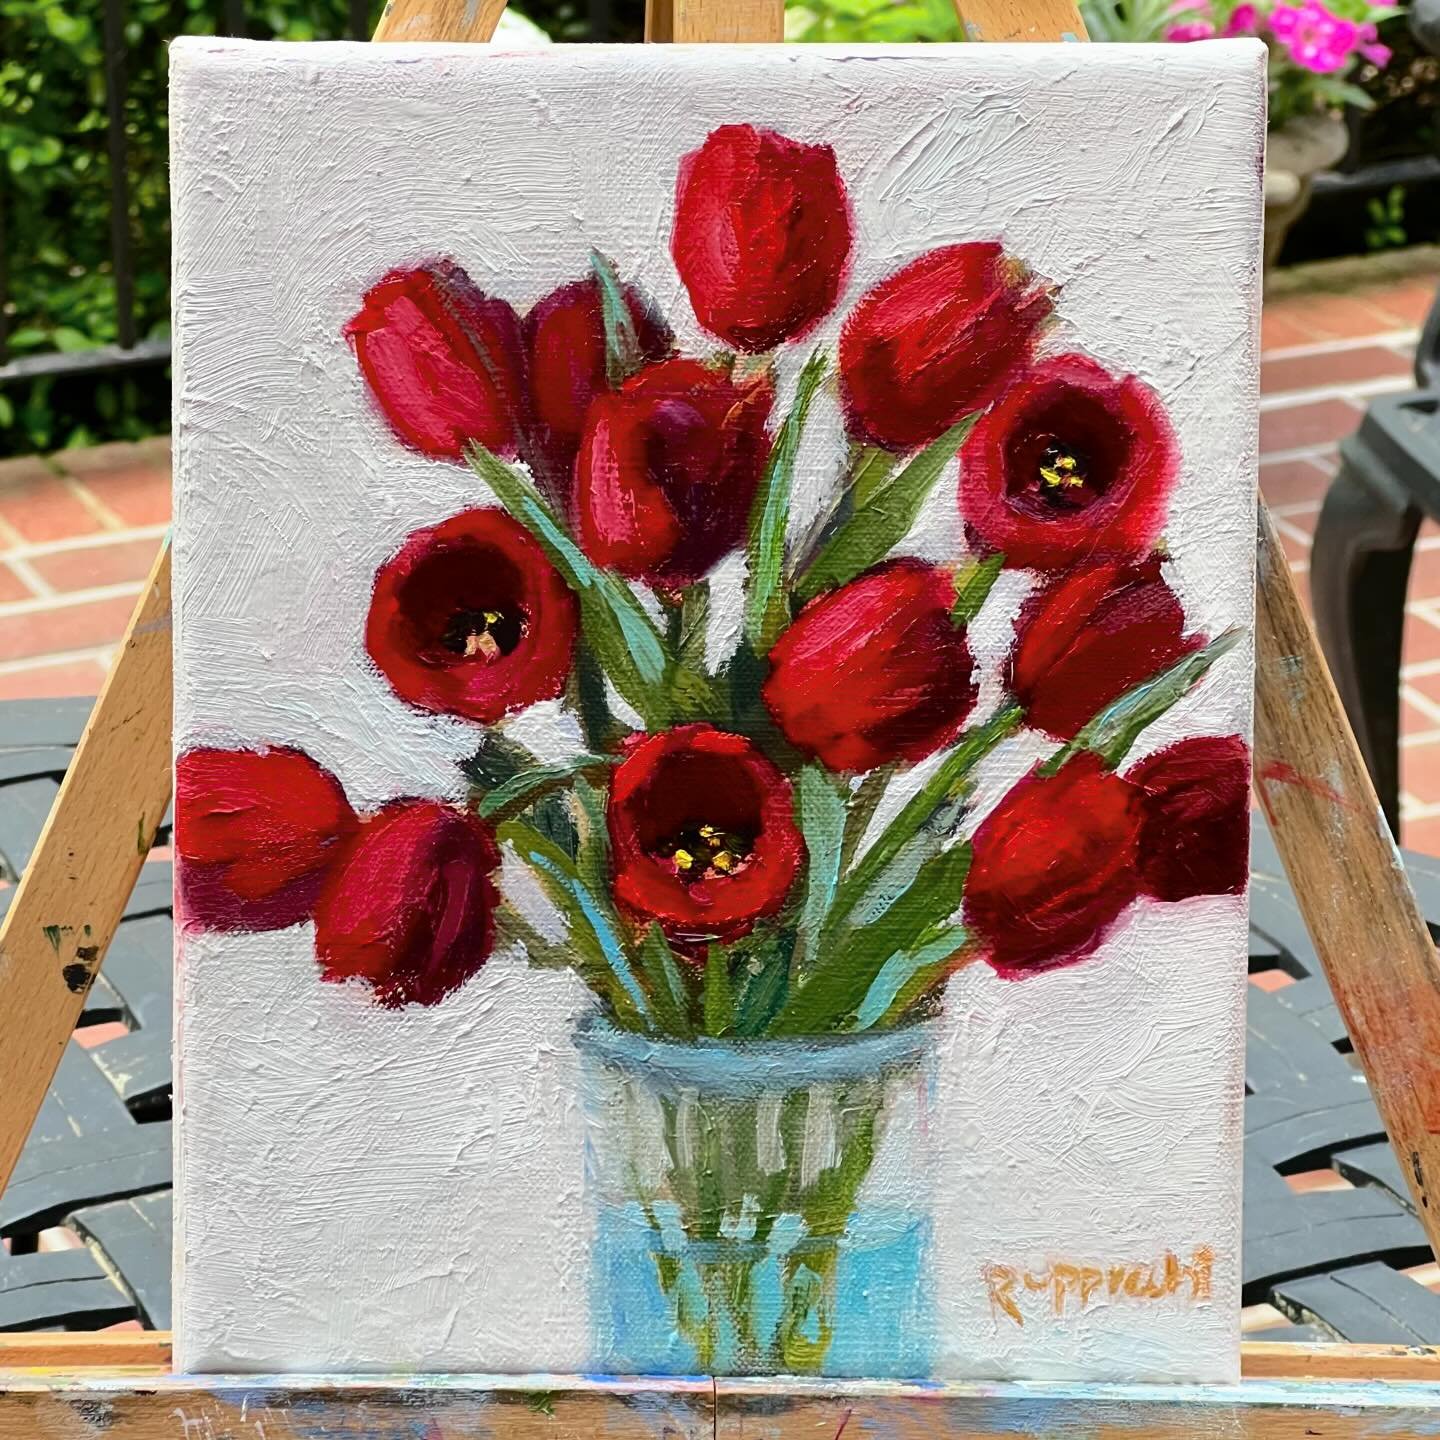 I&rsquo;m putting together a little collection of floral paintings! So far I have two tulips (one red, one pink), two red poppies, a purple Iris and I&rsquo;m working on two blue hydrangeas. 

They will be available this Friday at my studio open hous